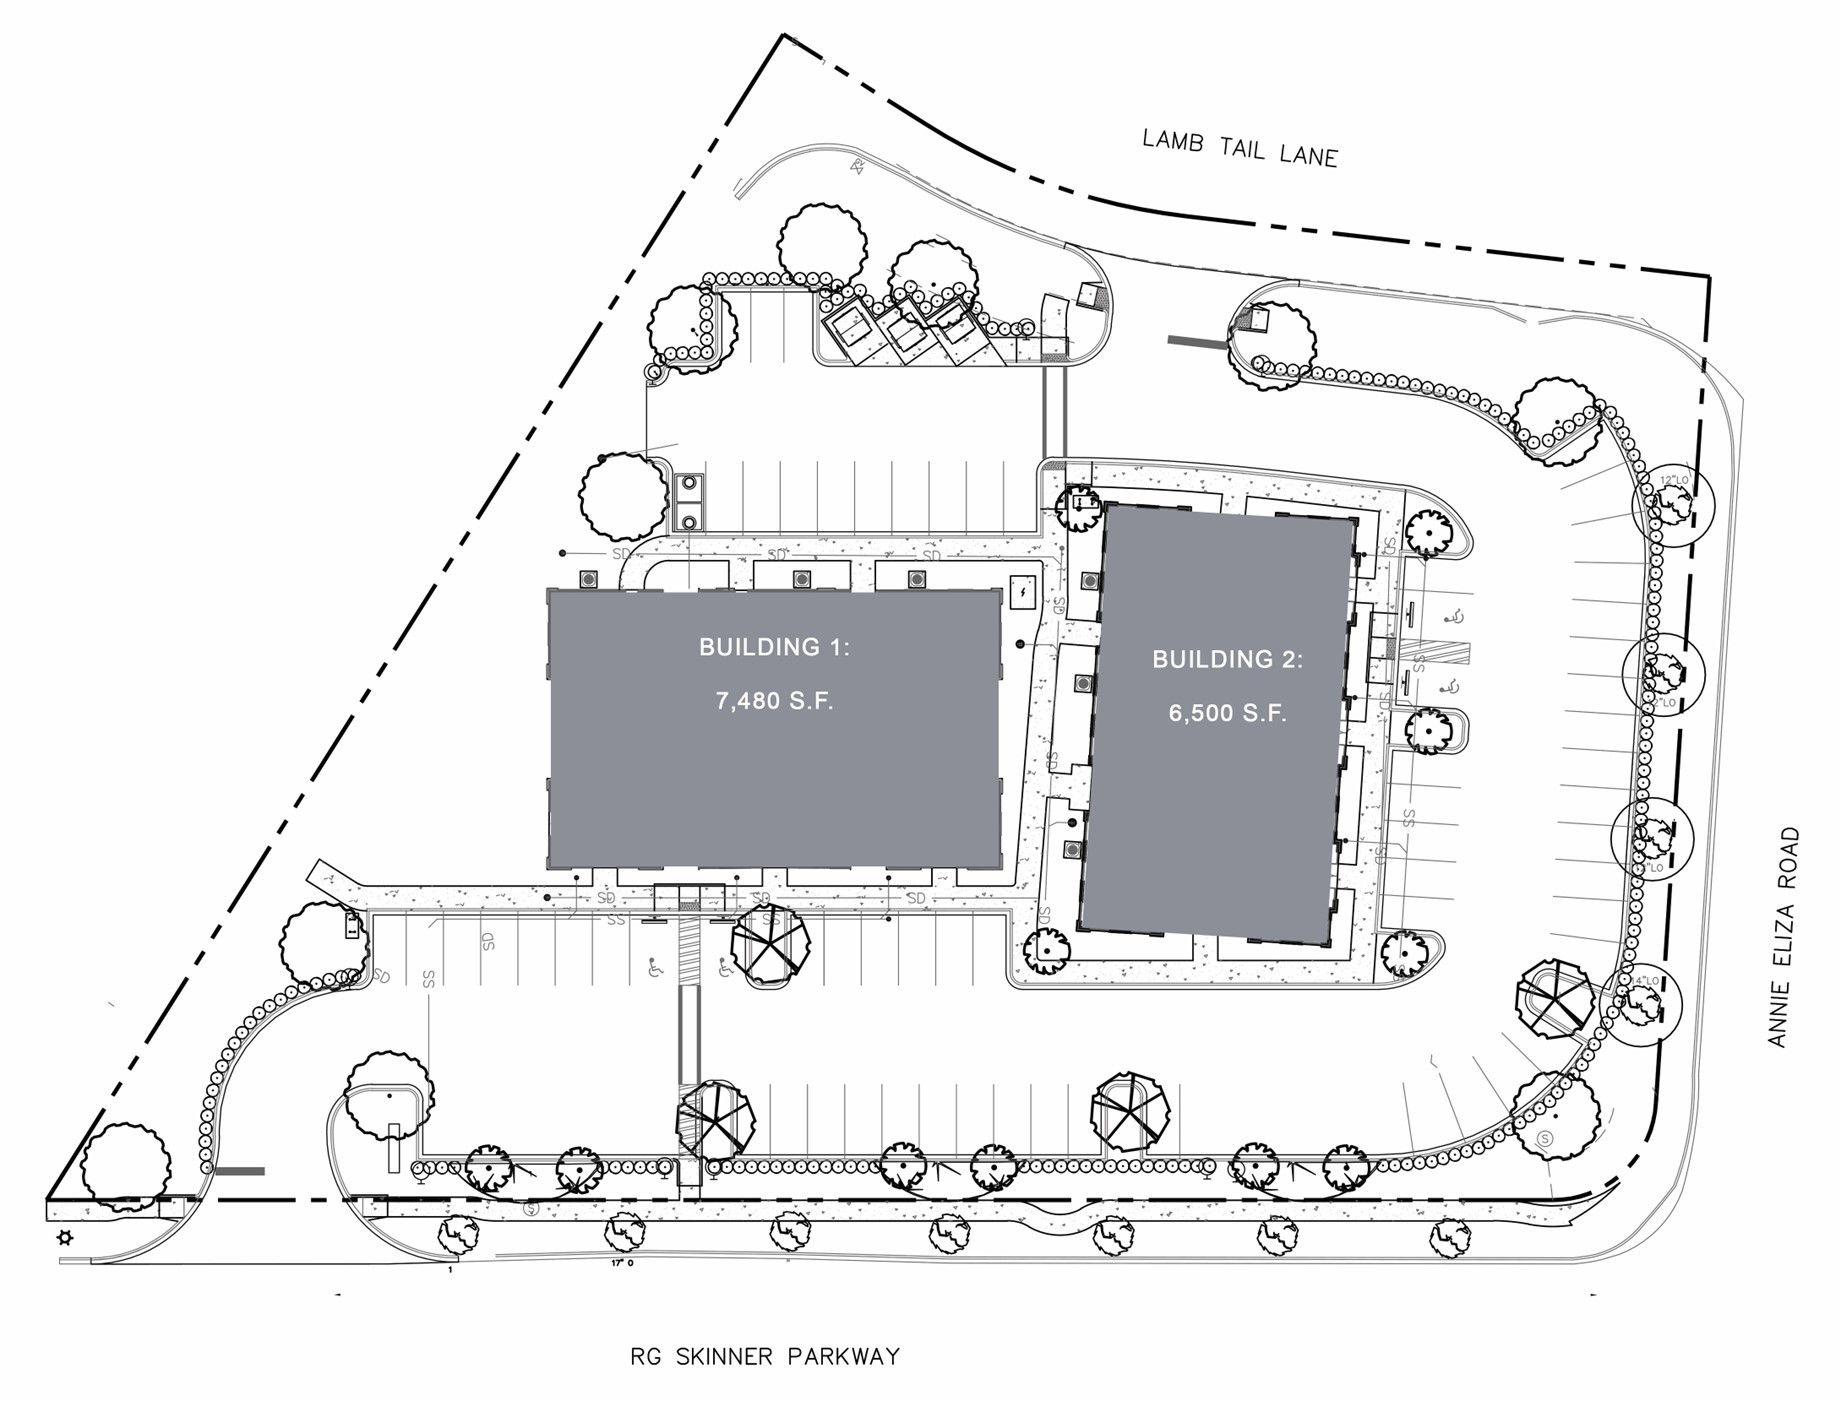 The site plan for Commons Park.